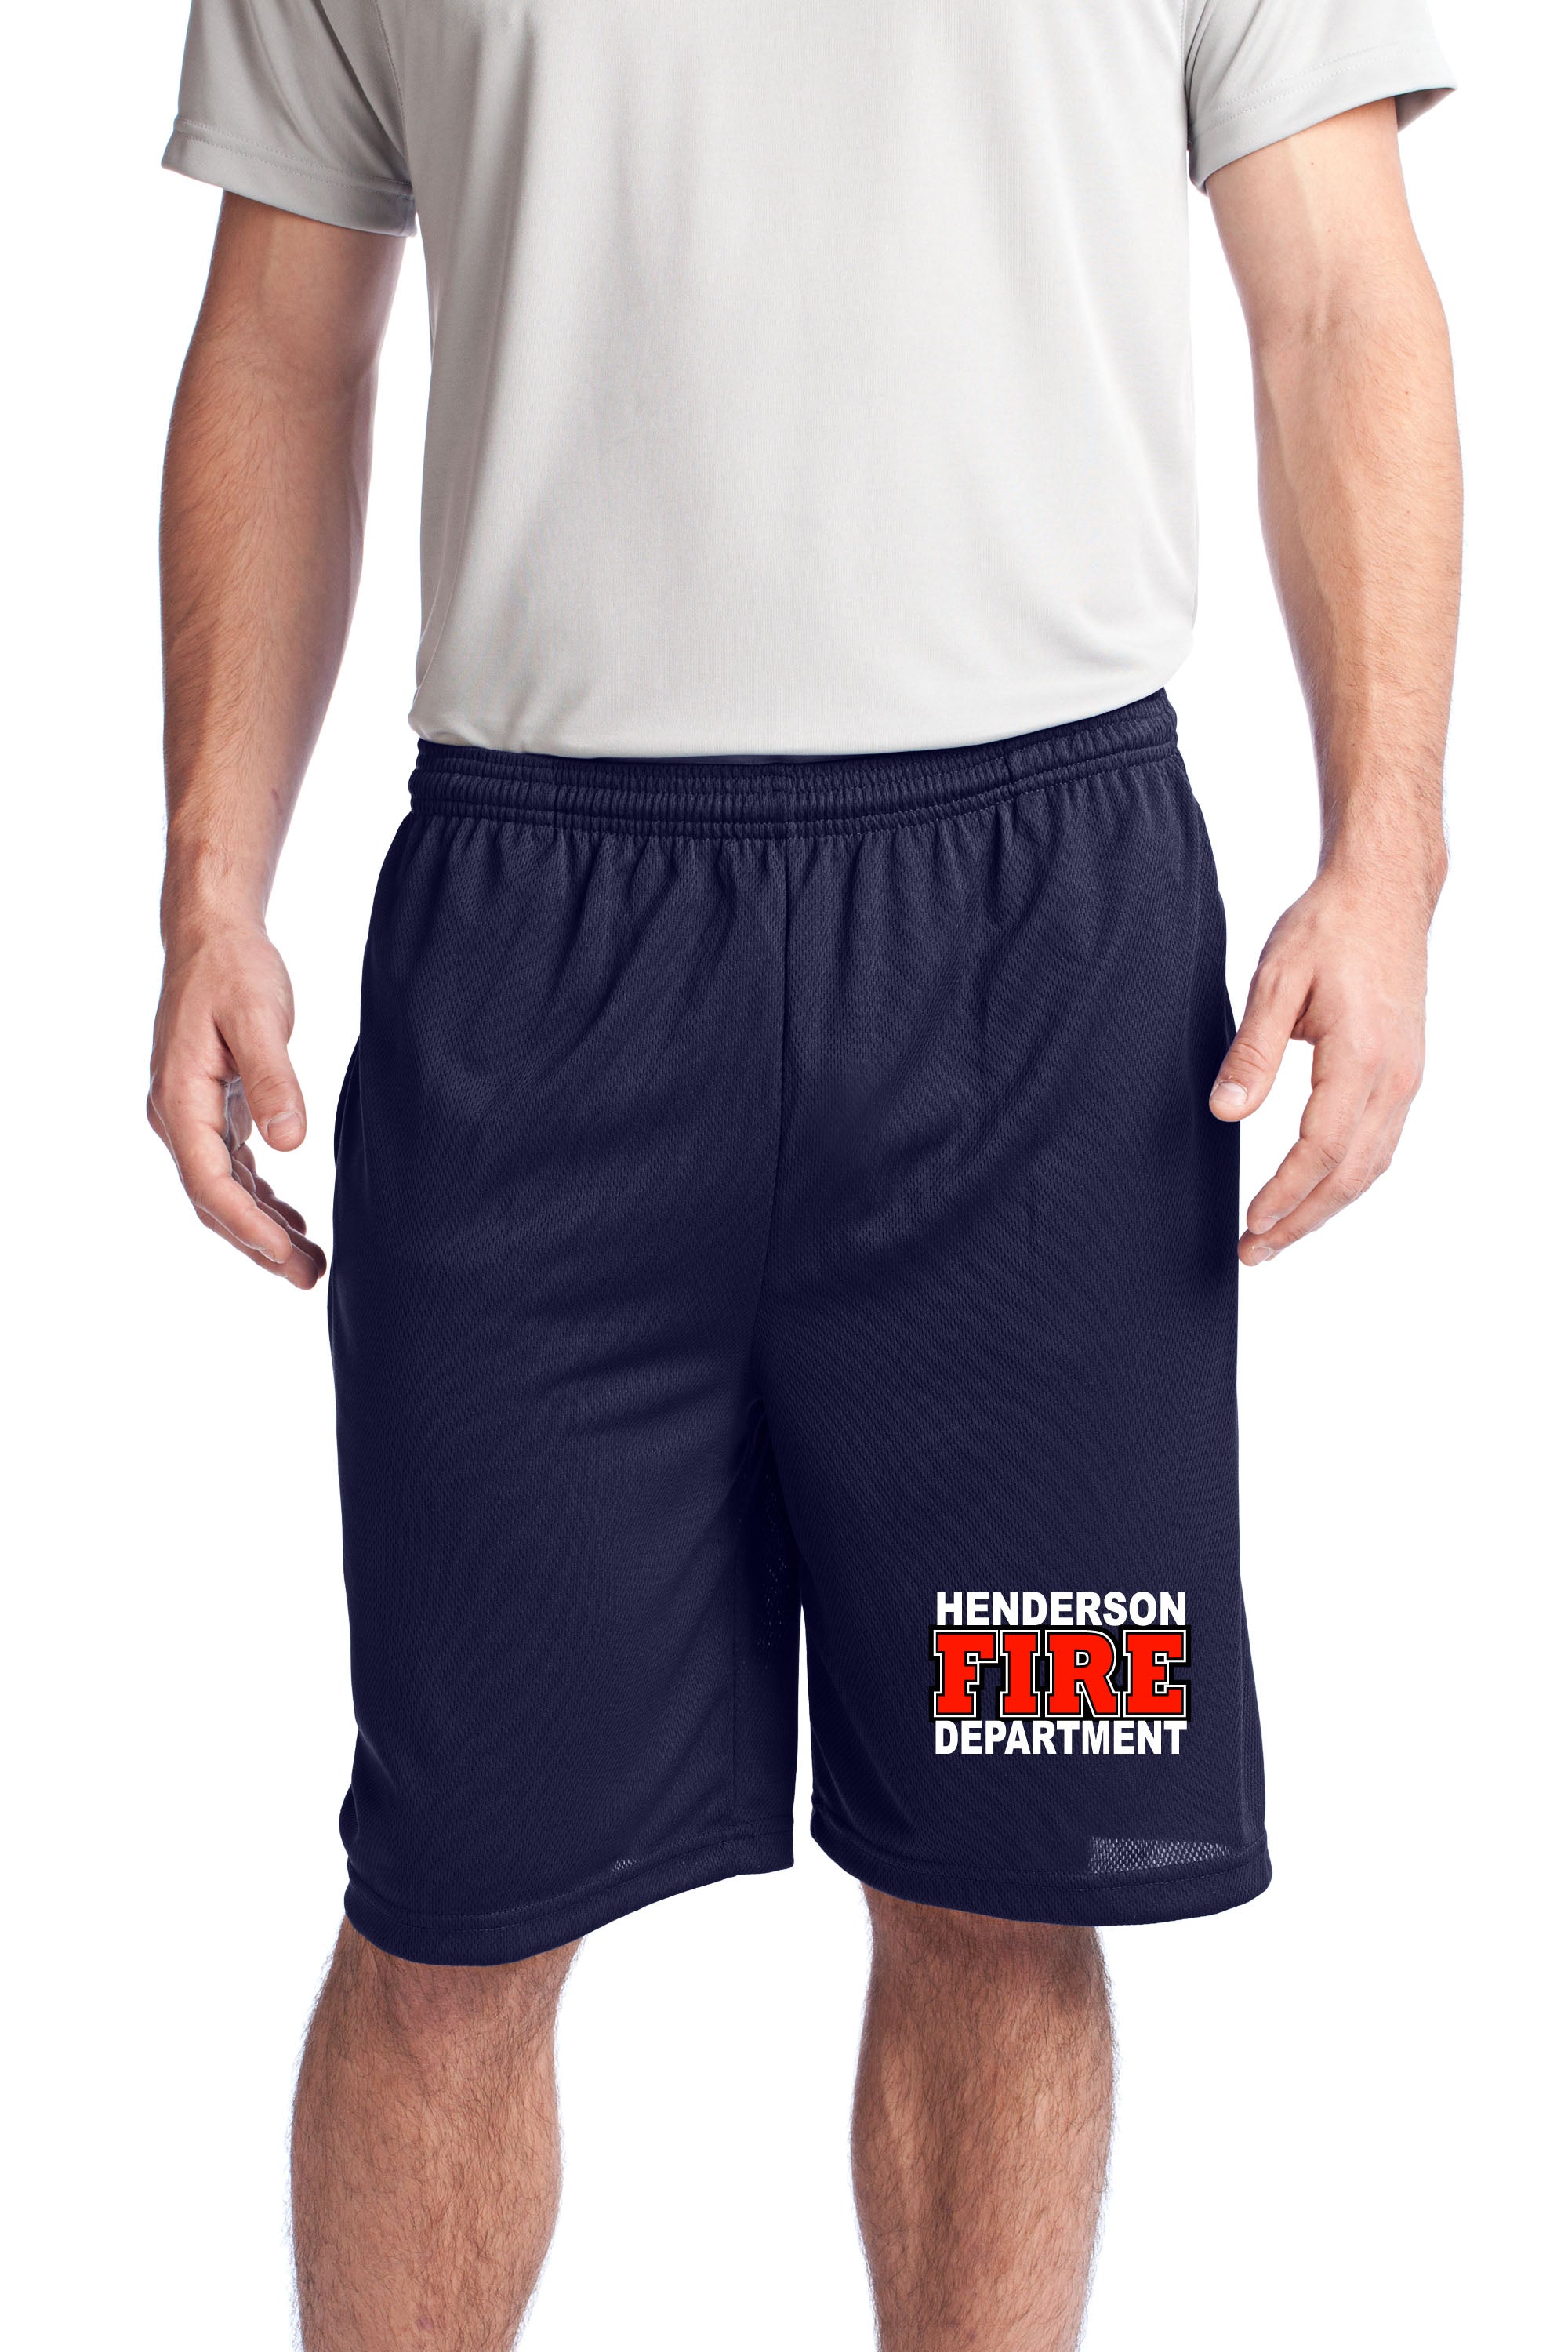 HFD POCKETED POLYESTER OFF DUTY Workout Shorts